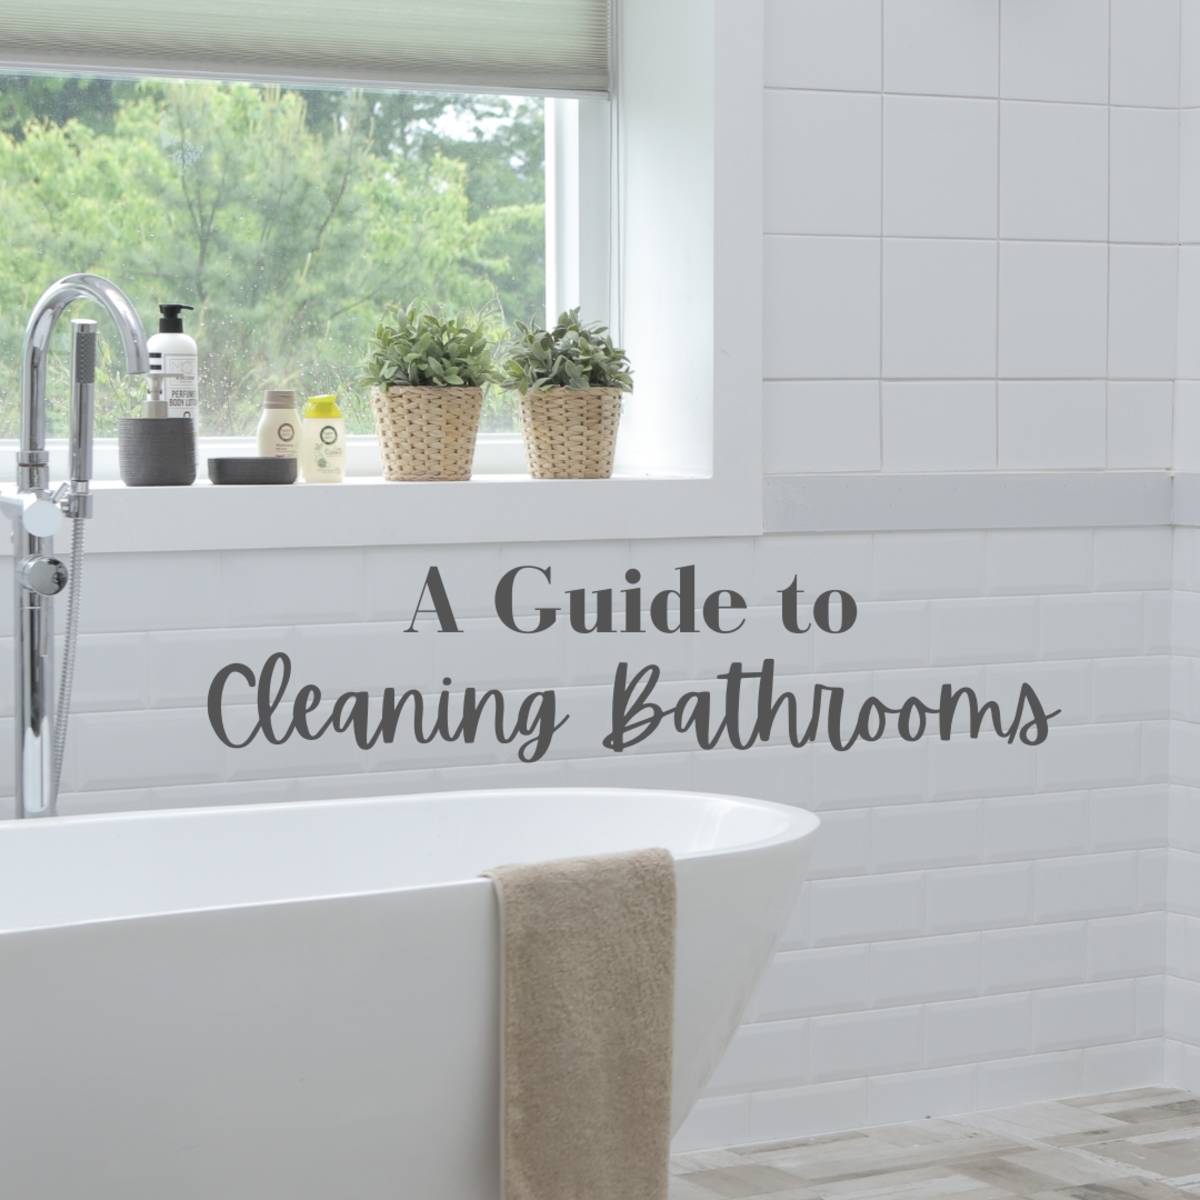 Bathrooms are really dirty but can be hard to keep clean—here are some tips and tricks for keeping them spotless.